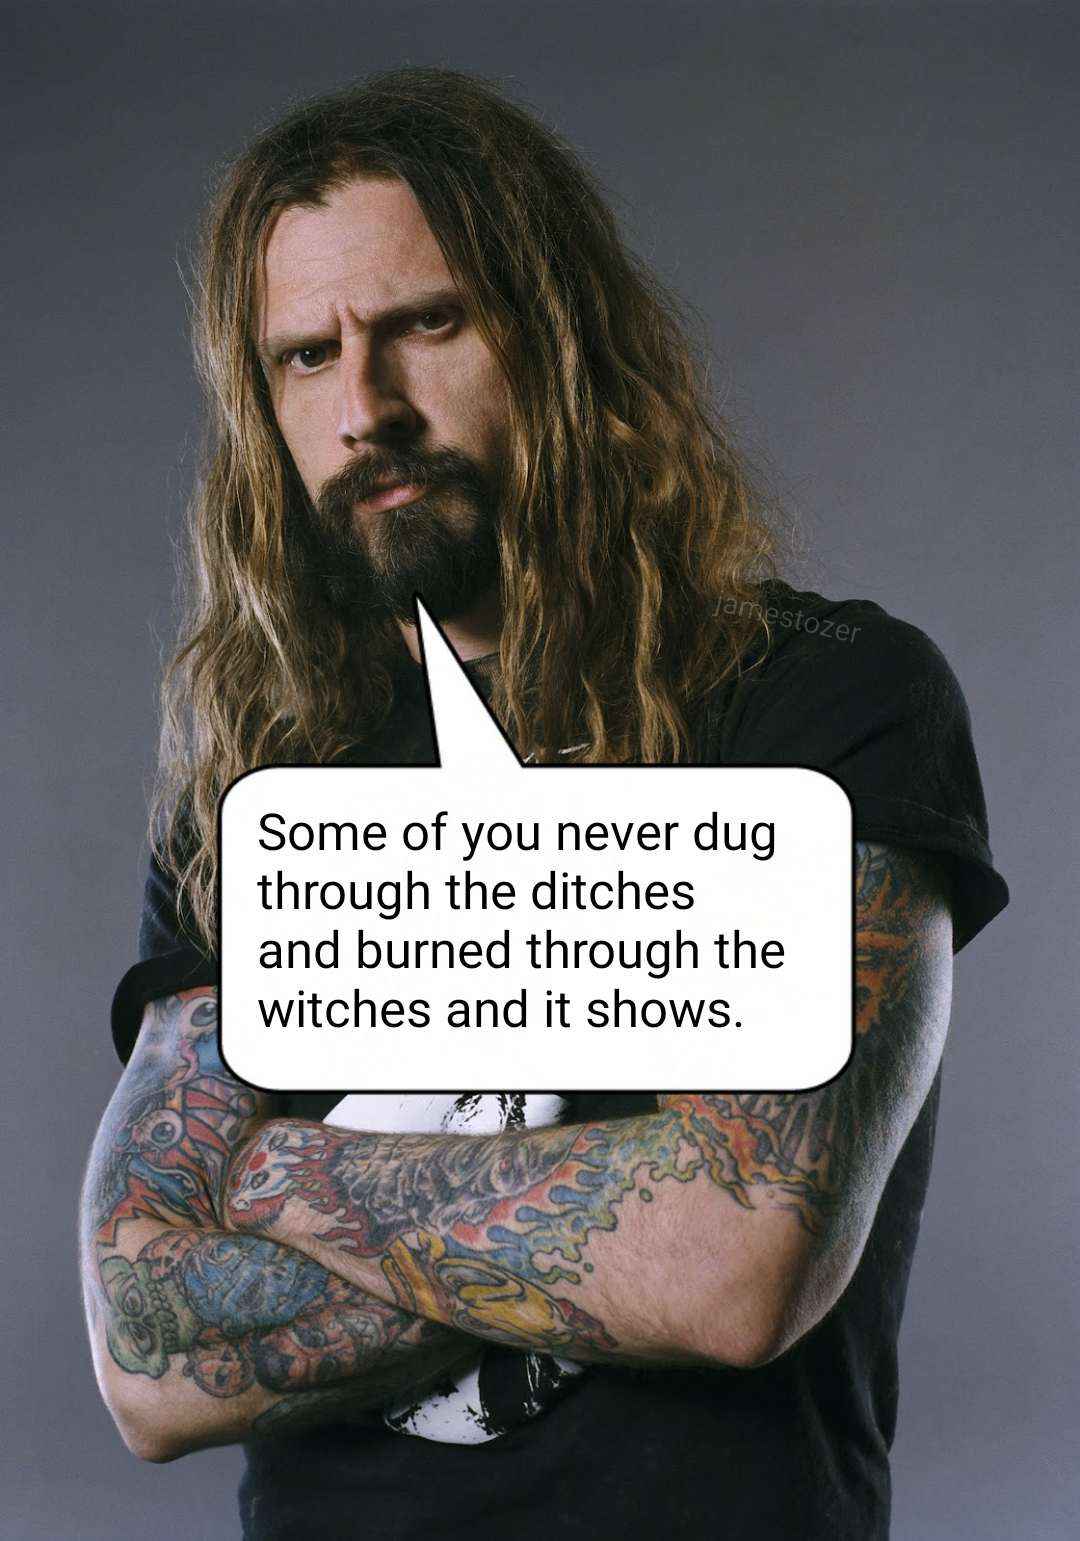 memes - rob zombie net worth - Some of you never dug through the ditches and burned through the witches and it shows.